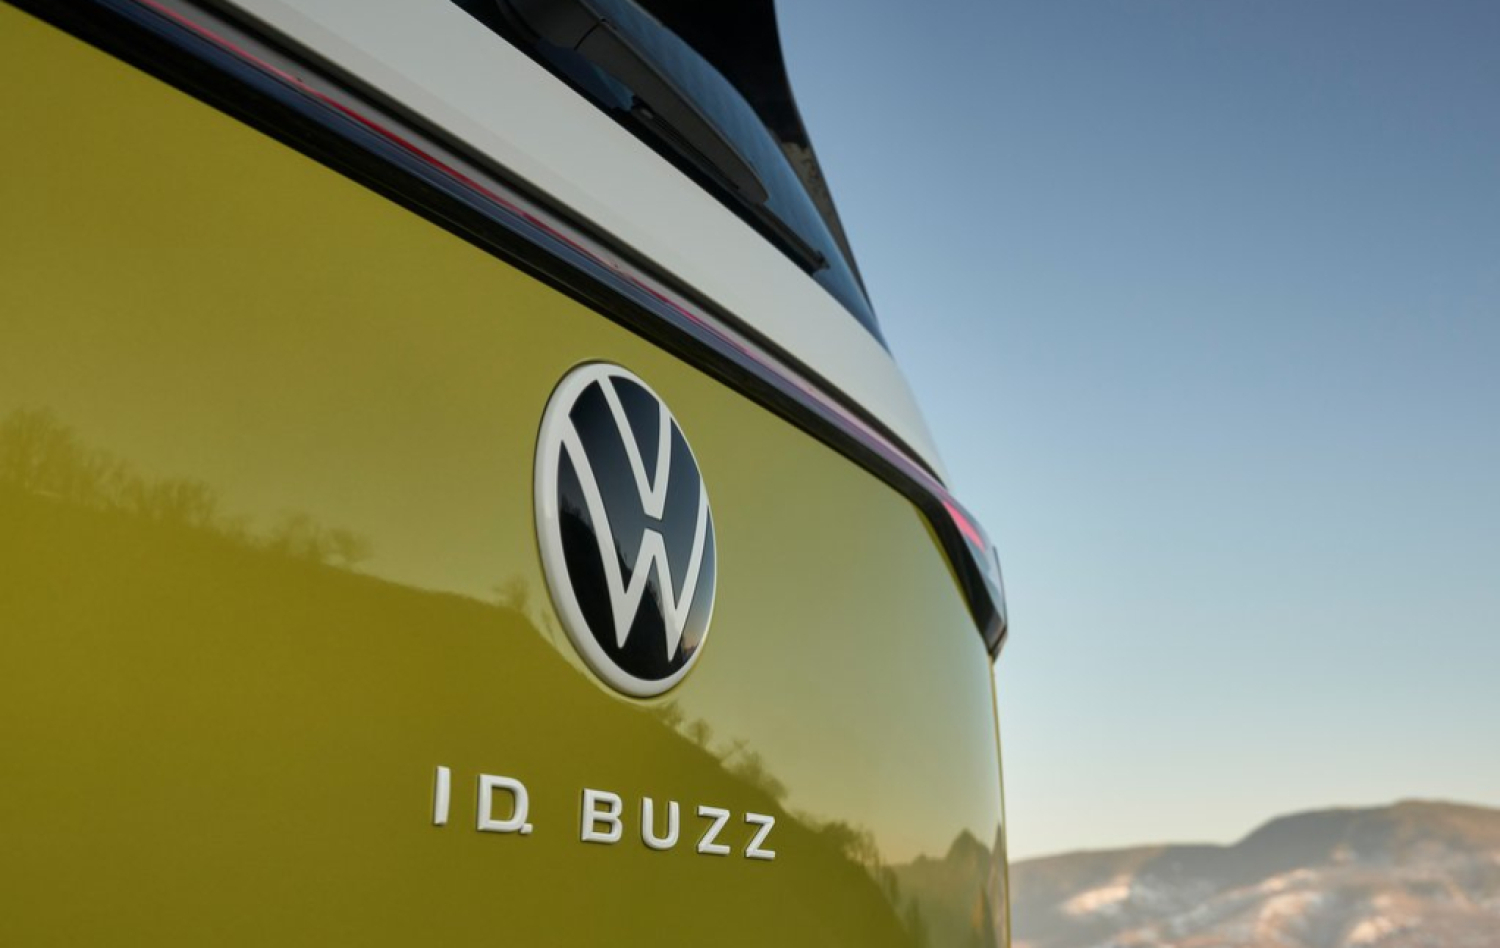 geba Kunststoffcompounds: The perfect deep gloss for ID emblems. Buzz and ID. 7 from VW with sustainable recycled PMMA